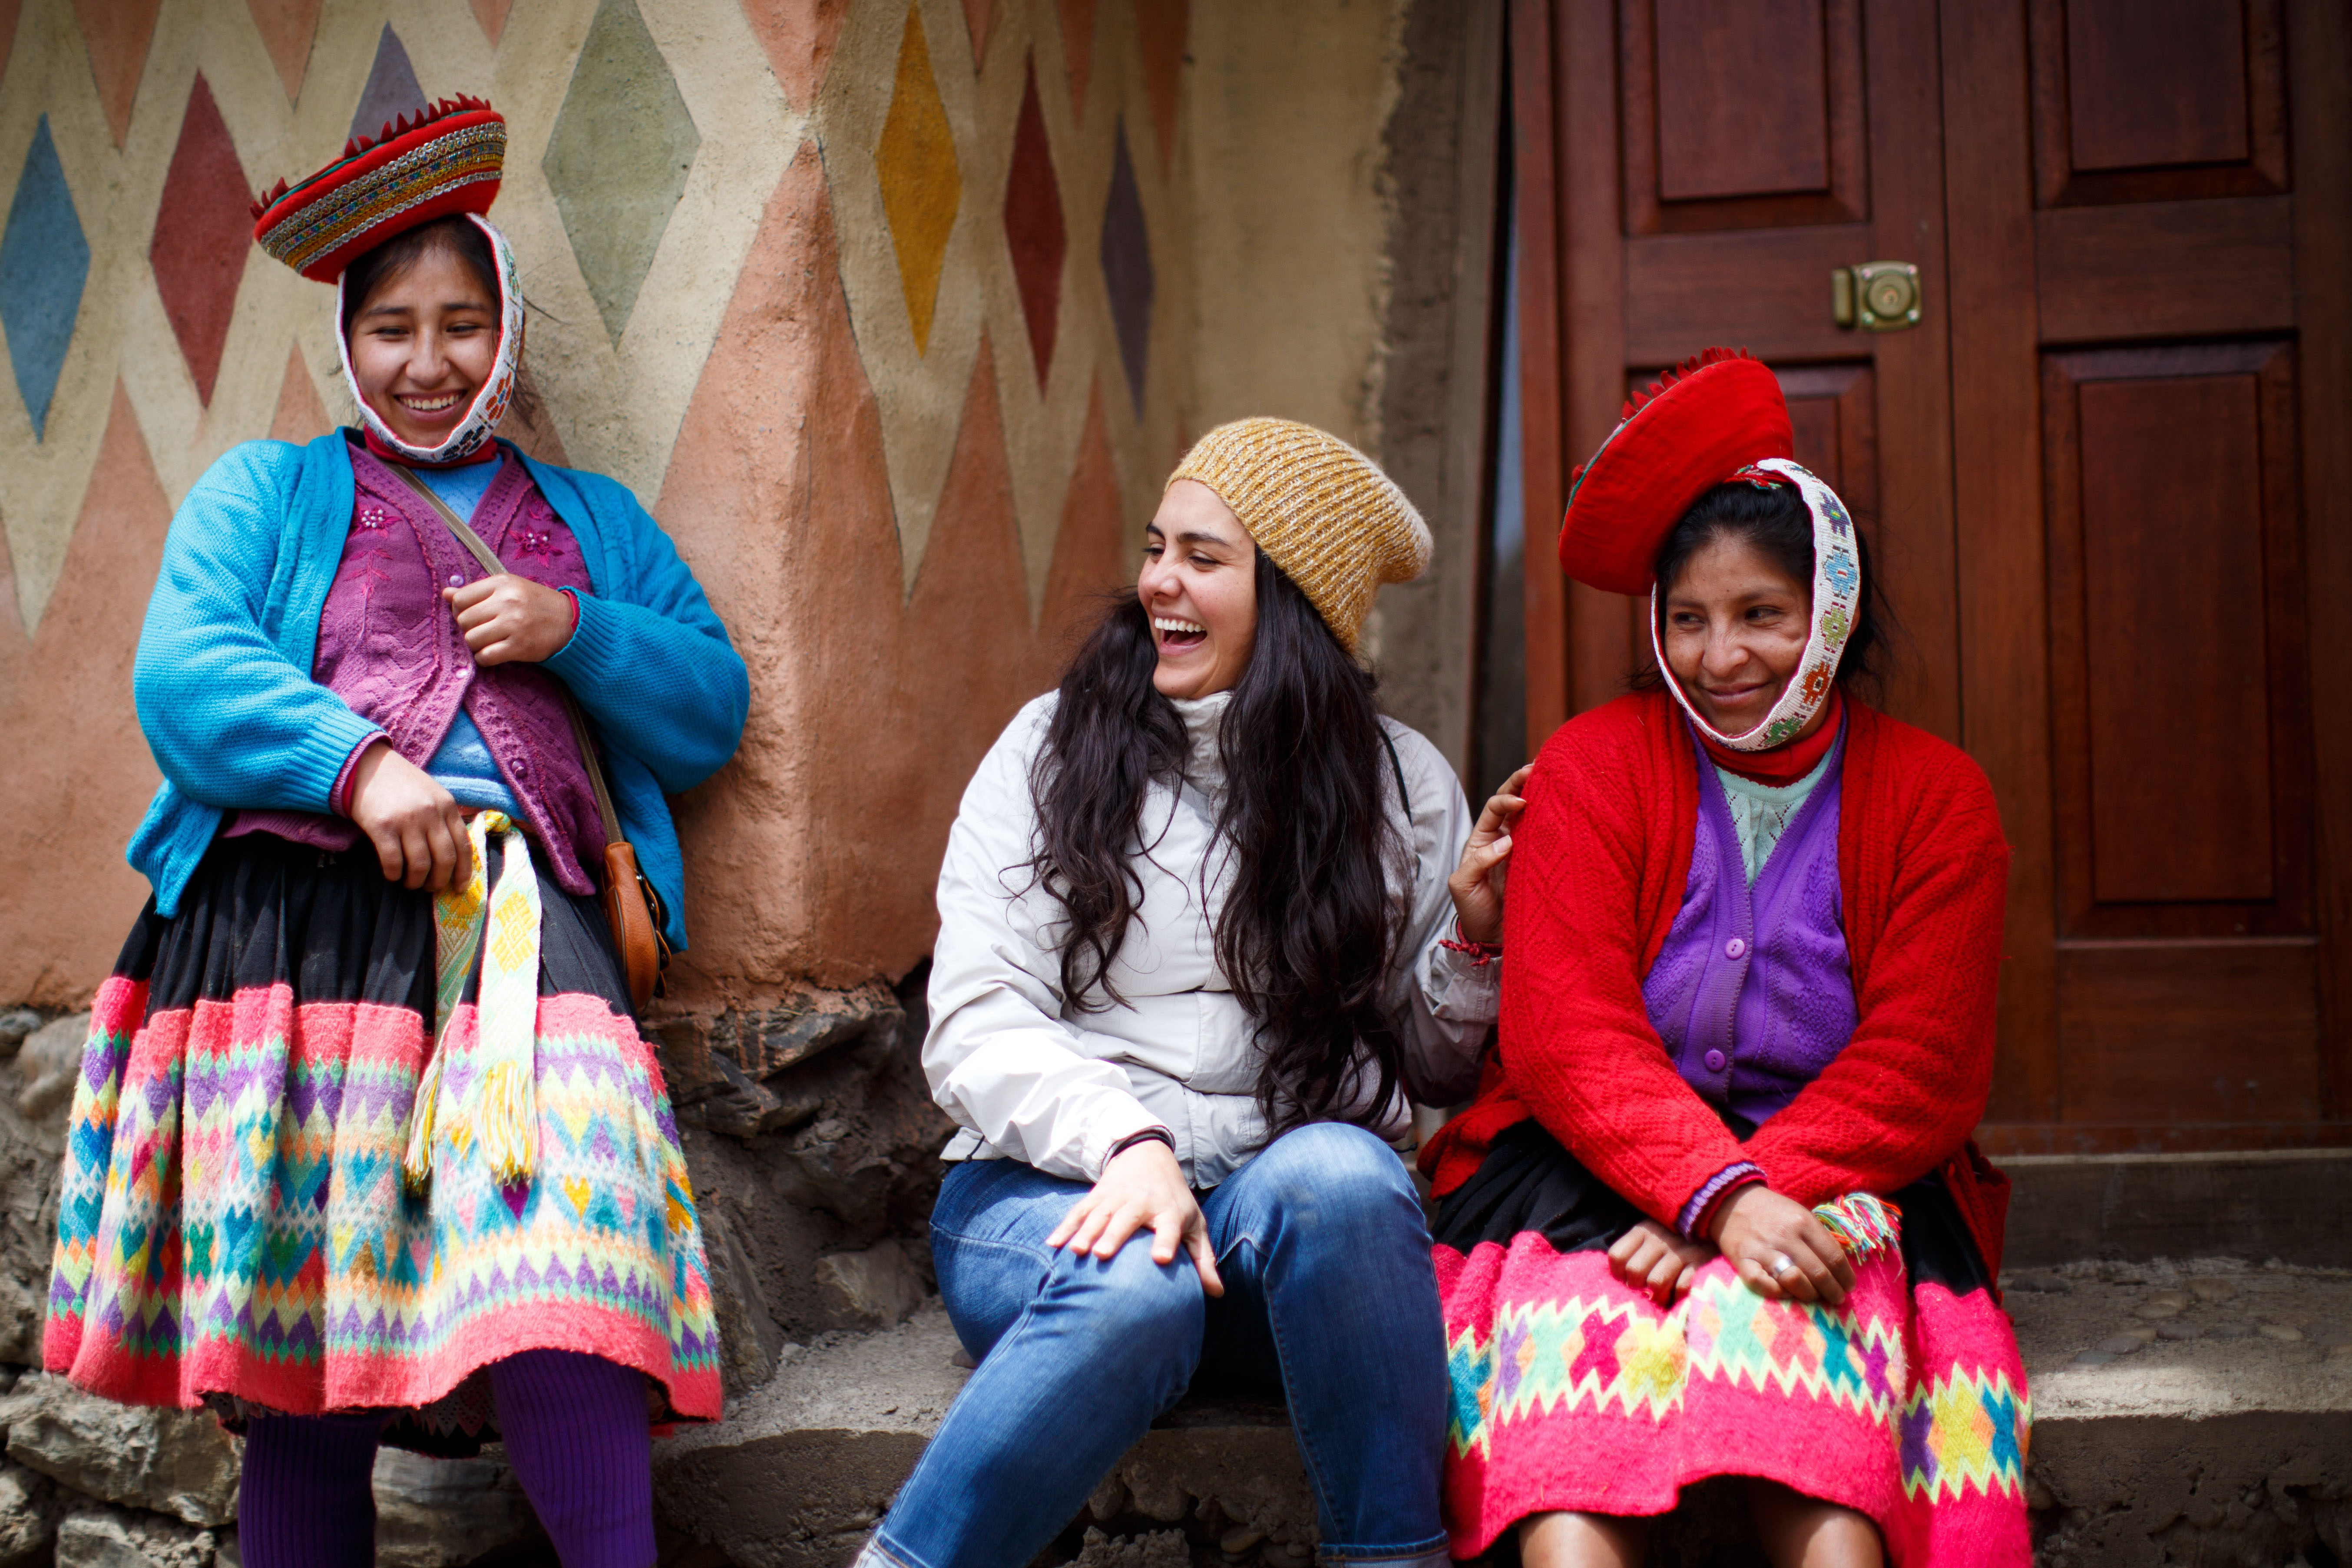 Carrillo-Muñoz enjoys a moment with two women who weave textiles for the apparel company Awamaki. (Photo: Anna Watts)